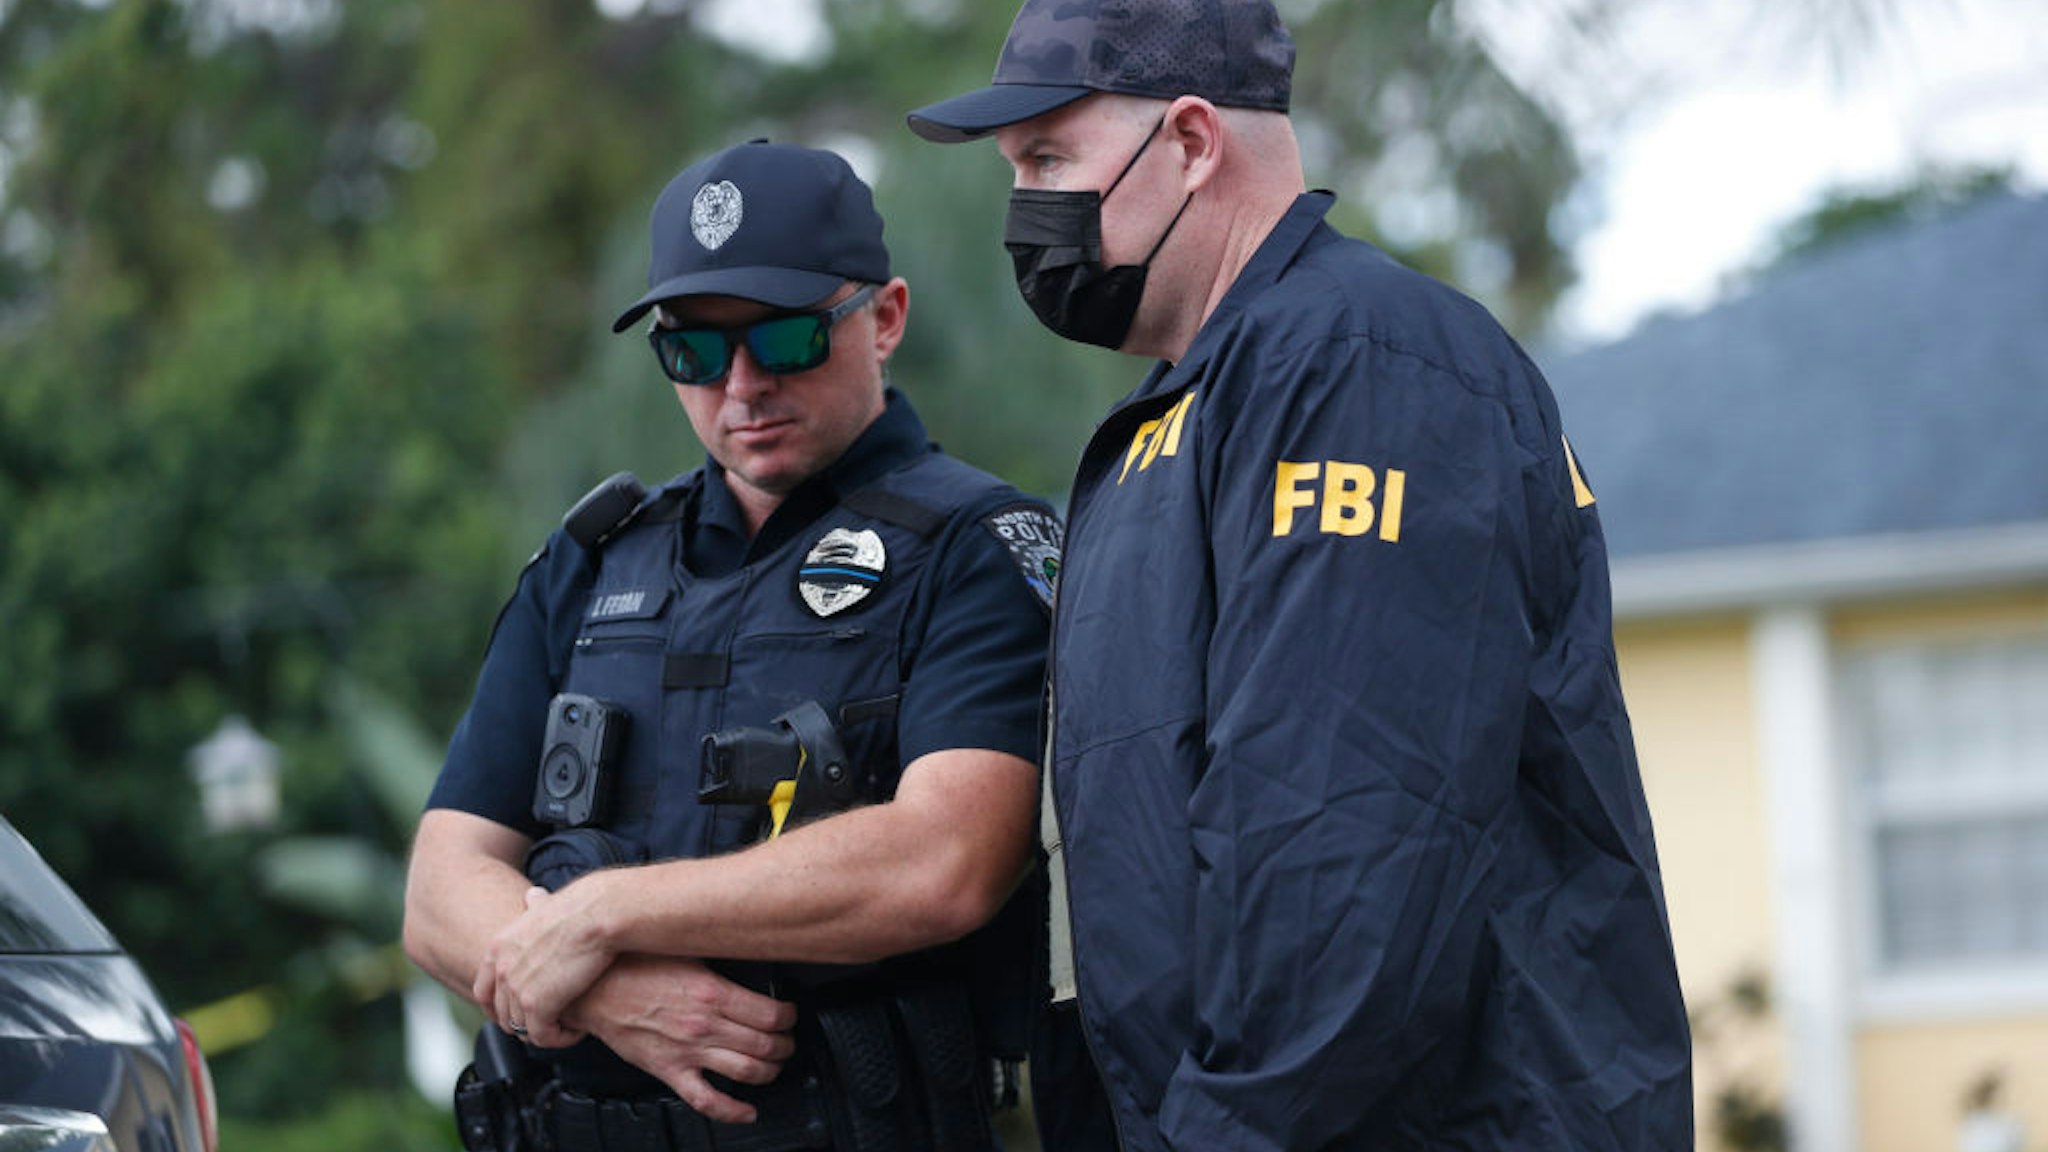 NORTH PORT, FL - SEPTEMBER 20: An FBI agent talks with a North Port officer while they collect evidence from the family home of Brian Laundrie, who is a person of interest after his fiancé Gabby Petito went missing on September 20, 2021 in North Port, Florida. A body has been found by authorities in Wyoming that fits the description of Petito, who went missing while on a cross country trip with Laundrie. (Photo by Octavio Jones/Getty Images)